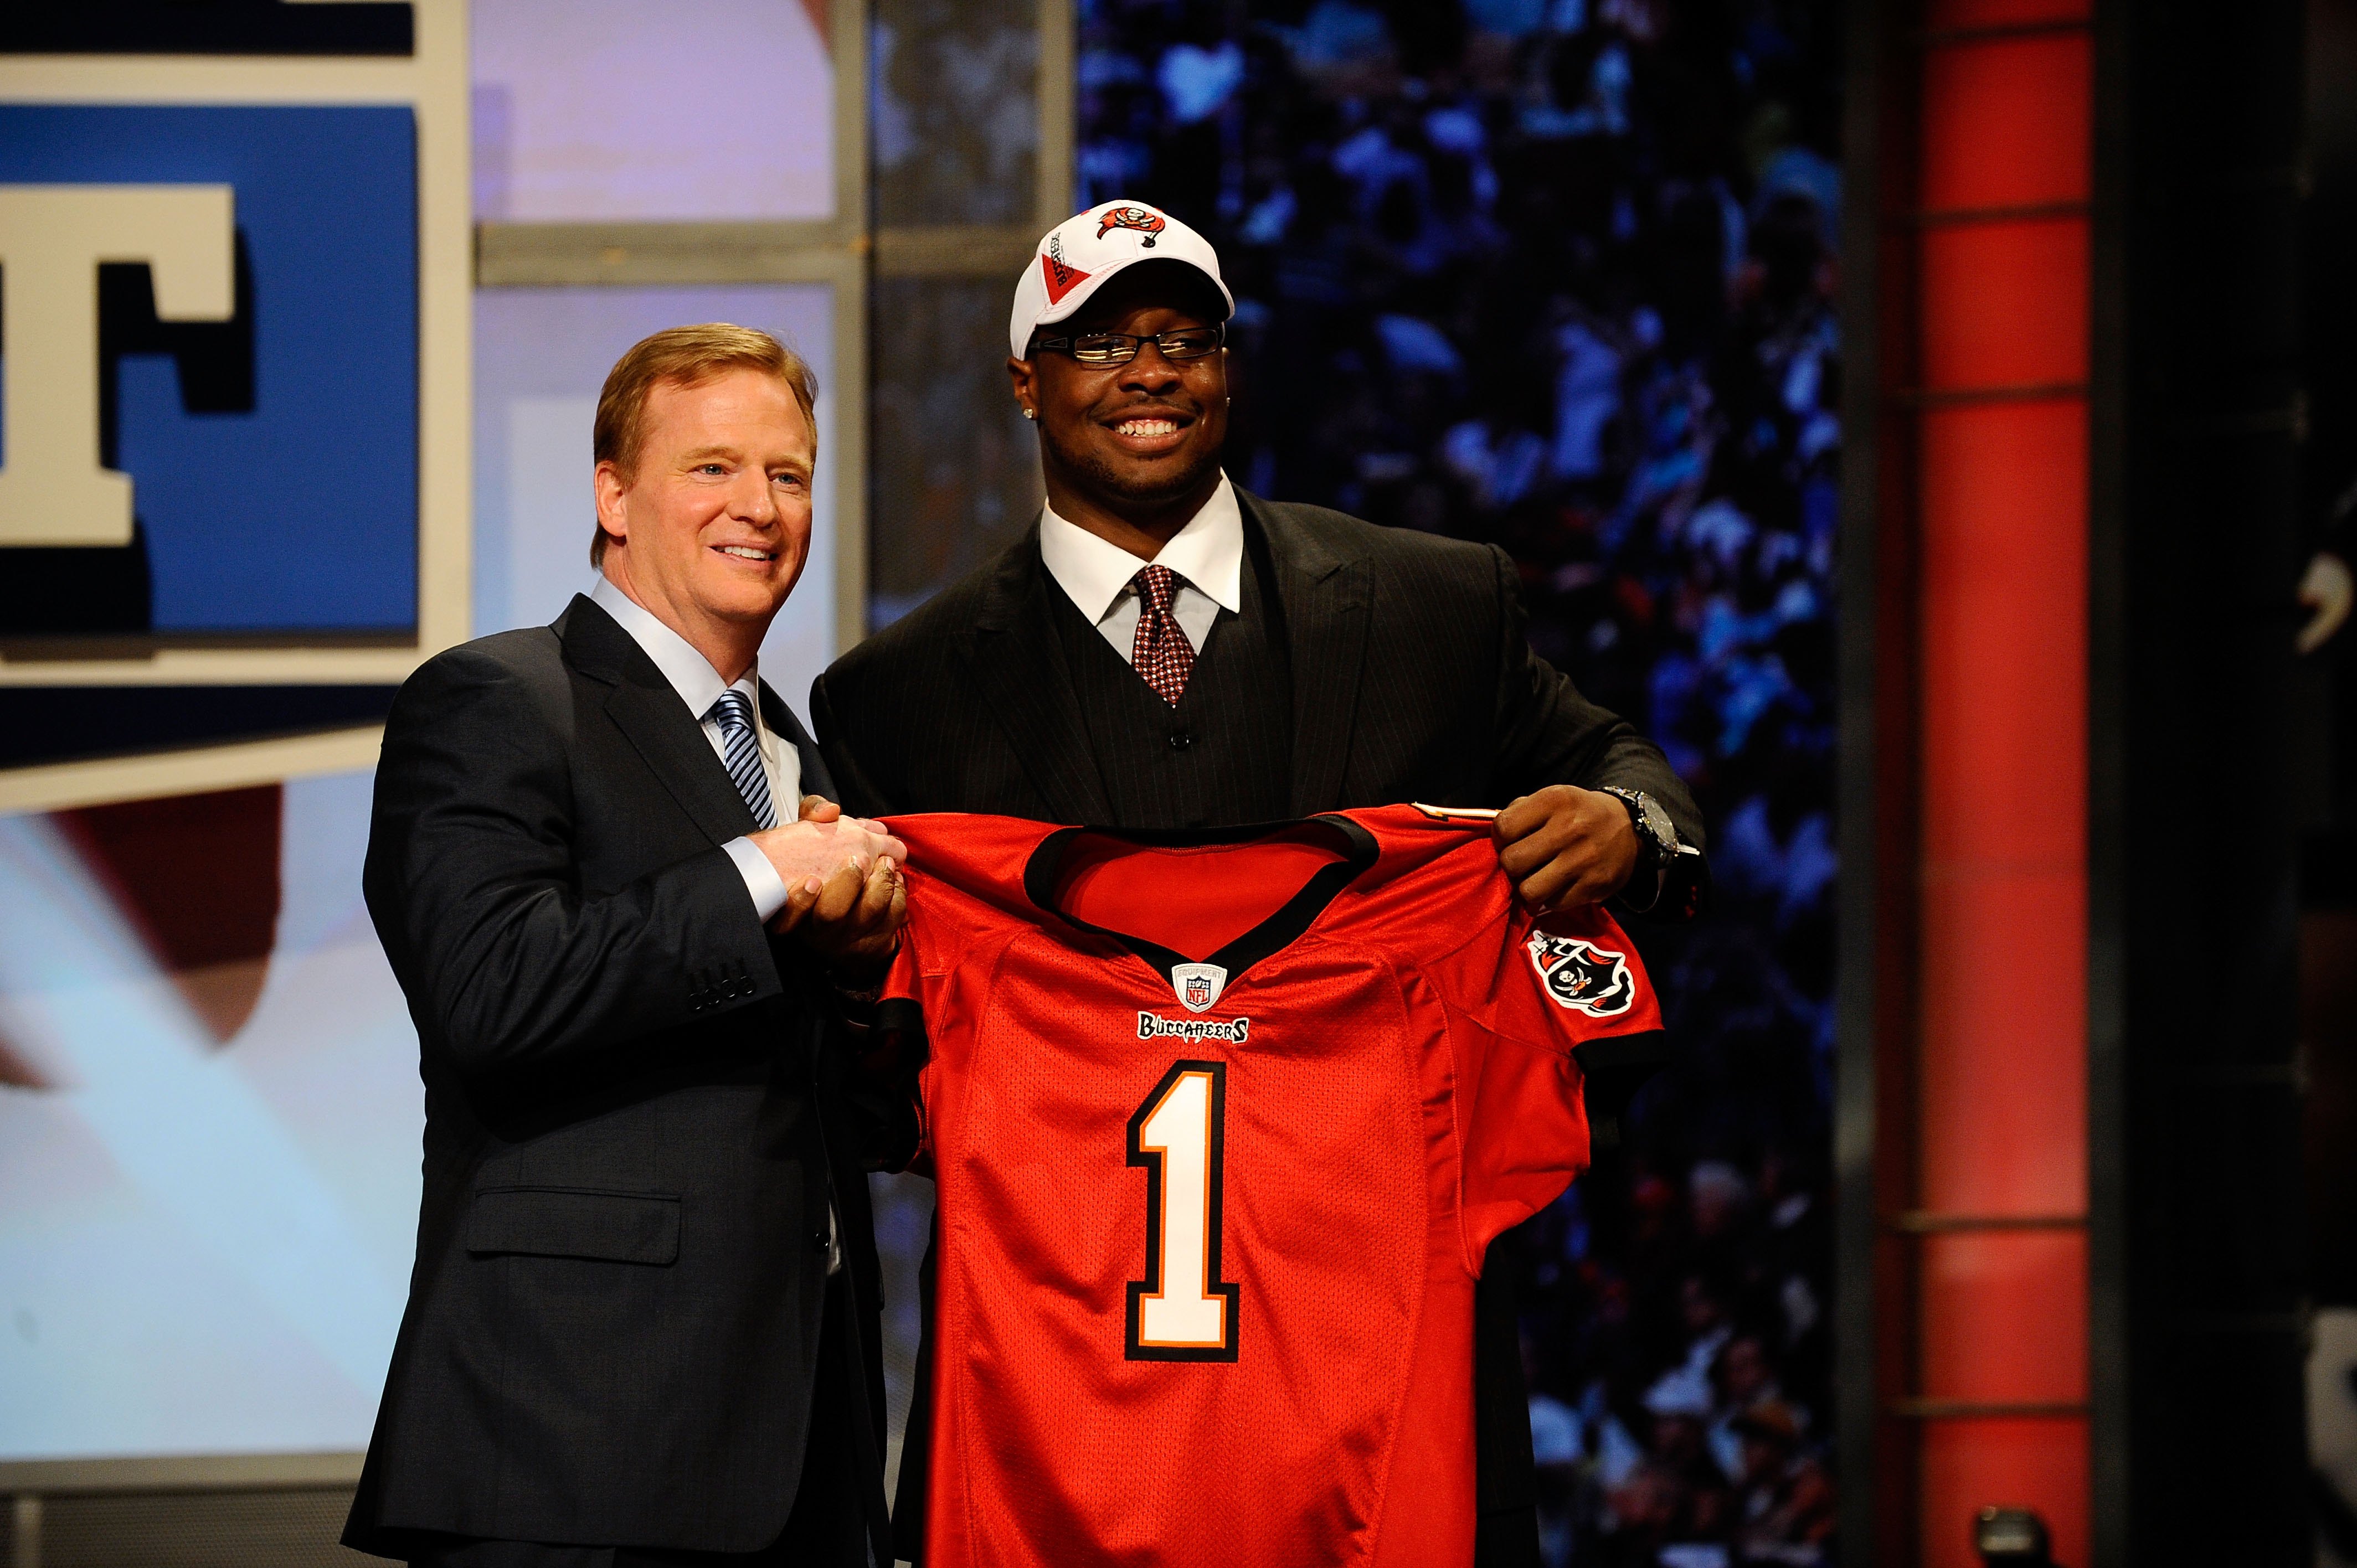 Oklahoma defensive tackle Gerald McCoy began the tradition of NFL draft picks exchanging hugs with commissioner Roger Goodell.